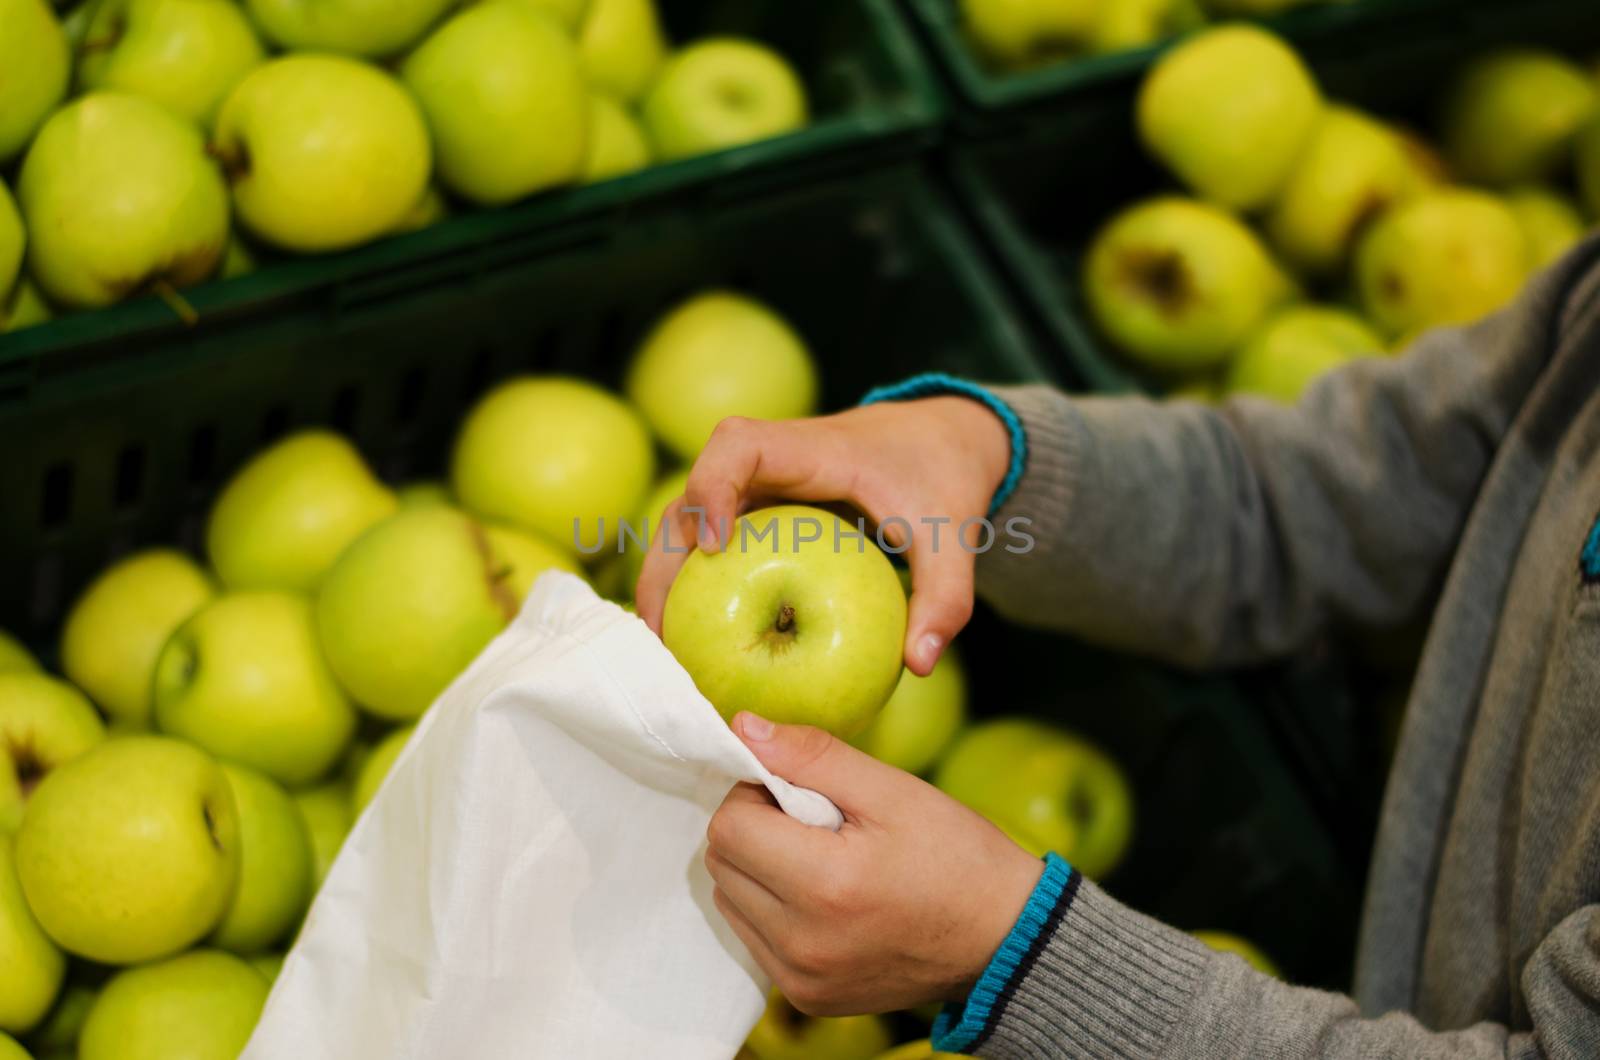 Children's hands put apples in a bag of cotton at the supermarket. Reusable environmental shopping bag. Zero waste concept. by IrinaZaychenko